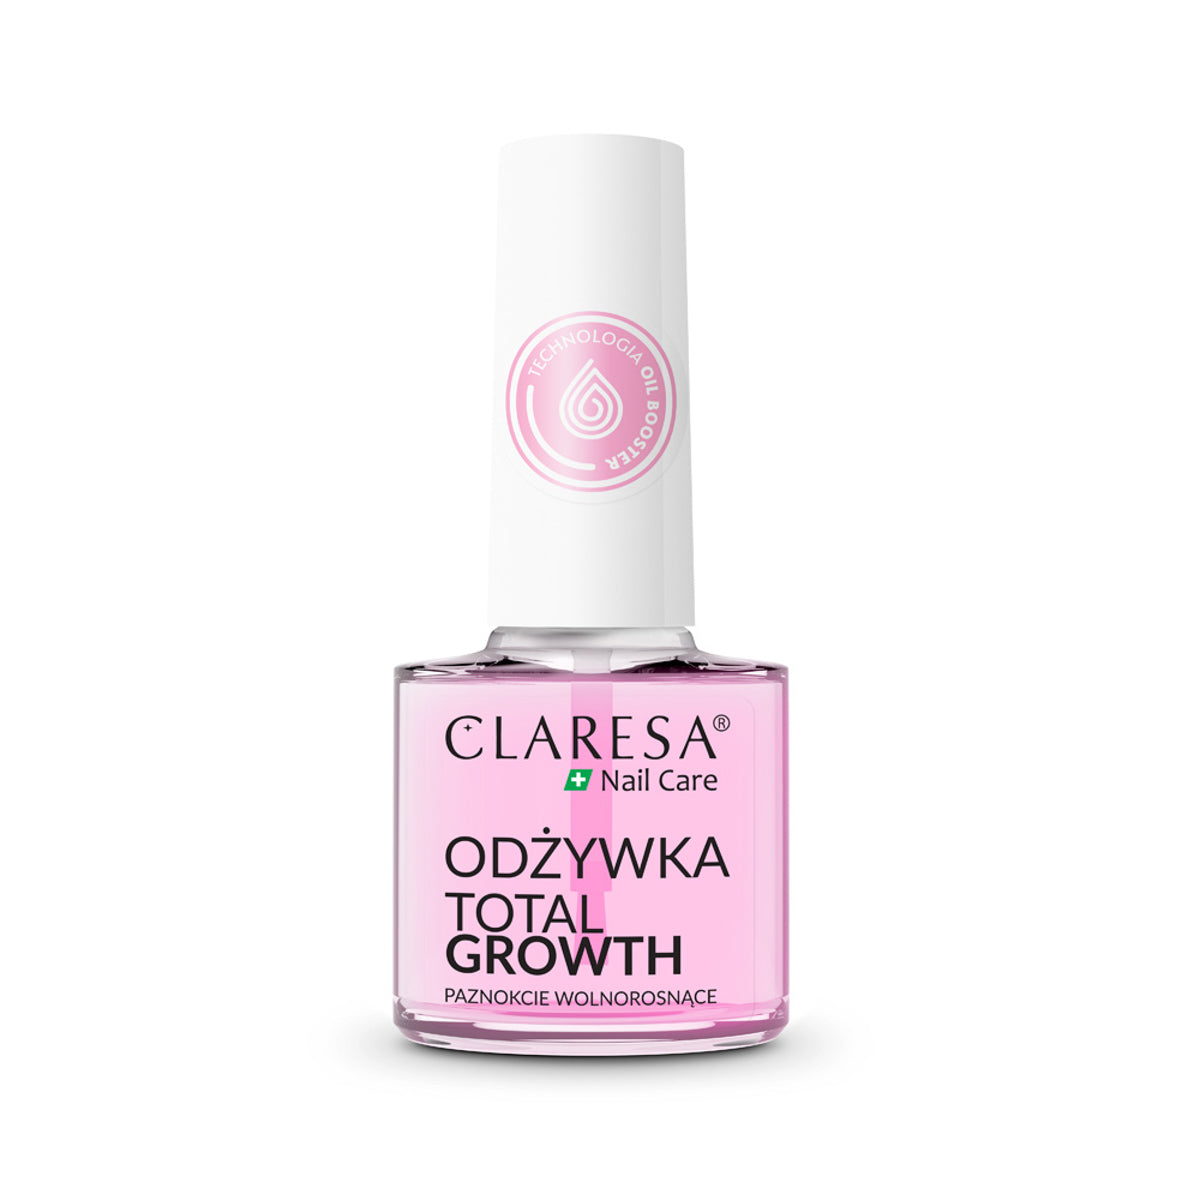 CLARESA Total Growth après-shampoing pour ongles 5 g